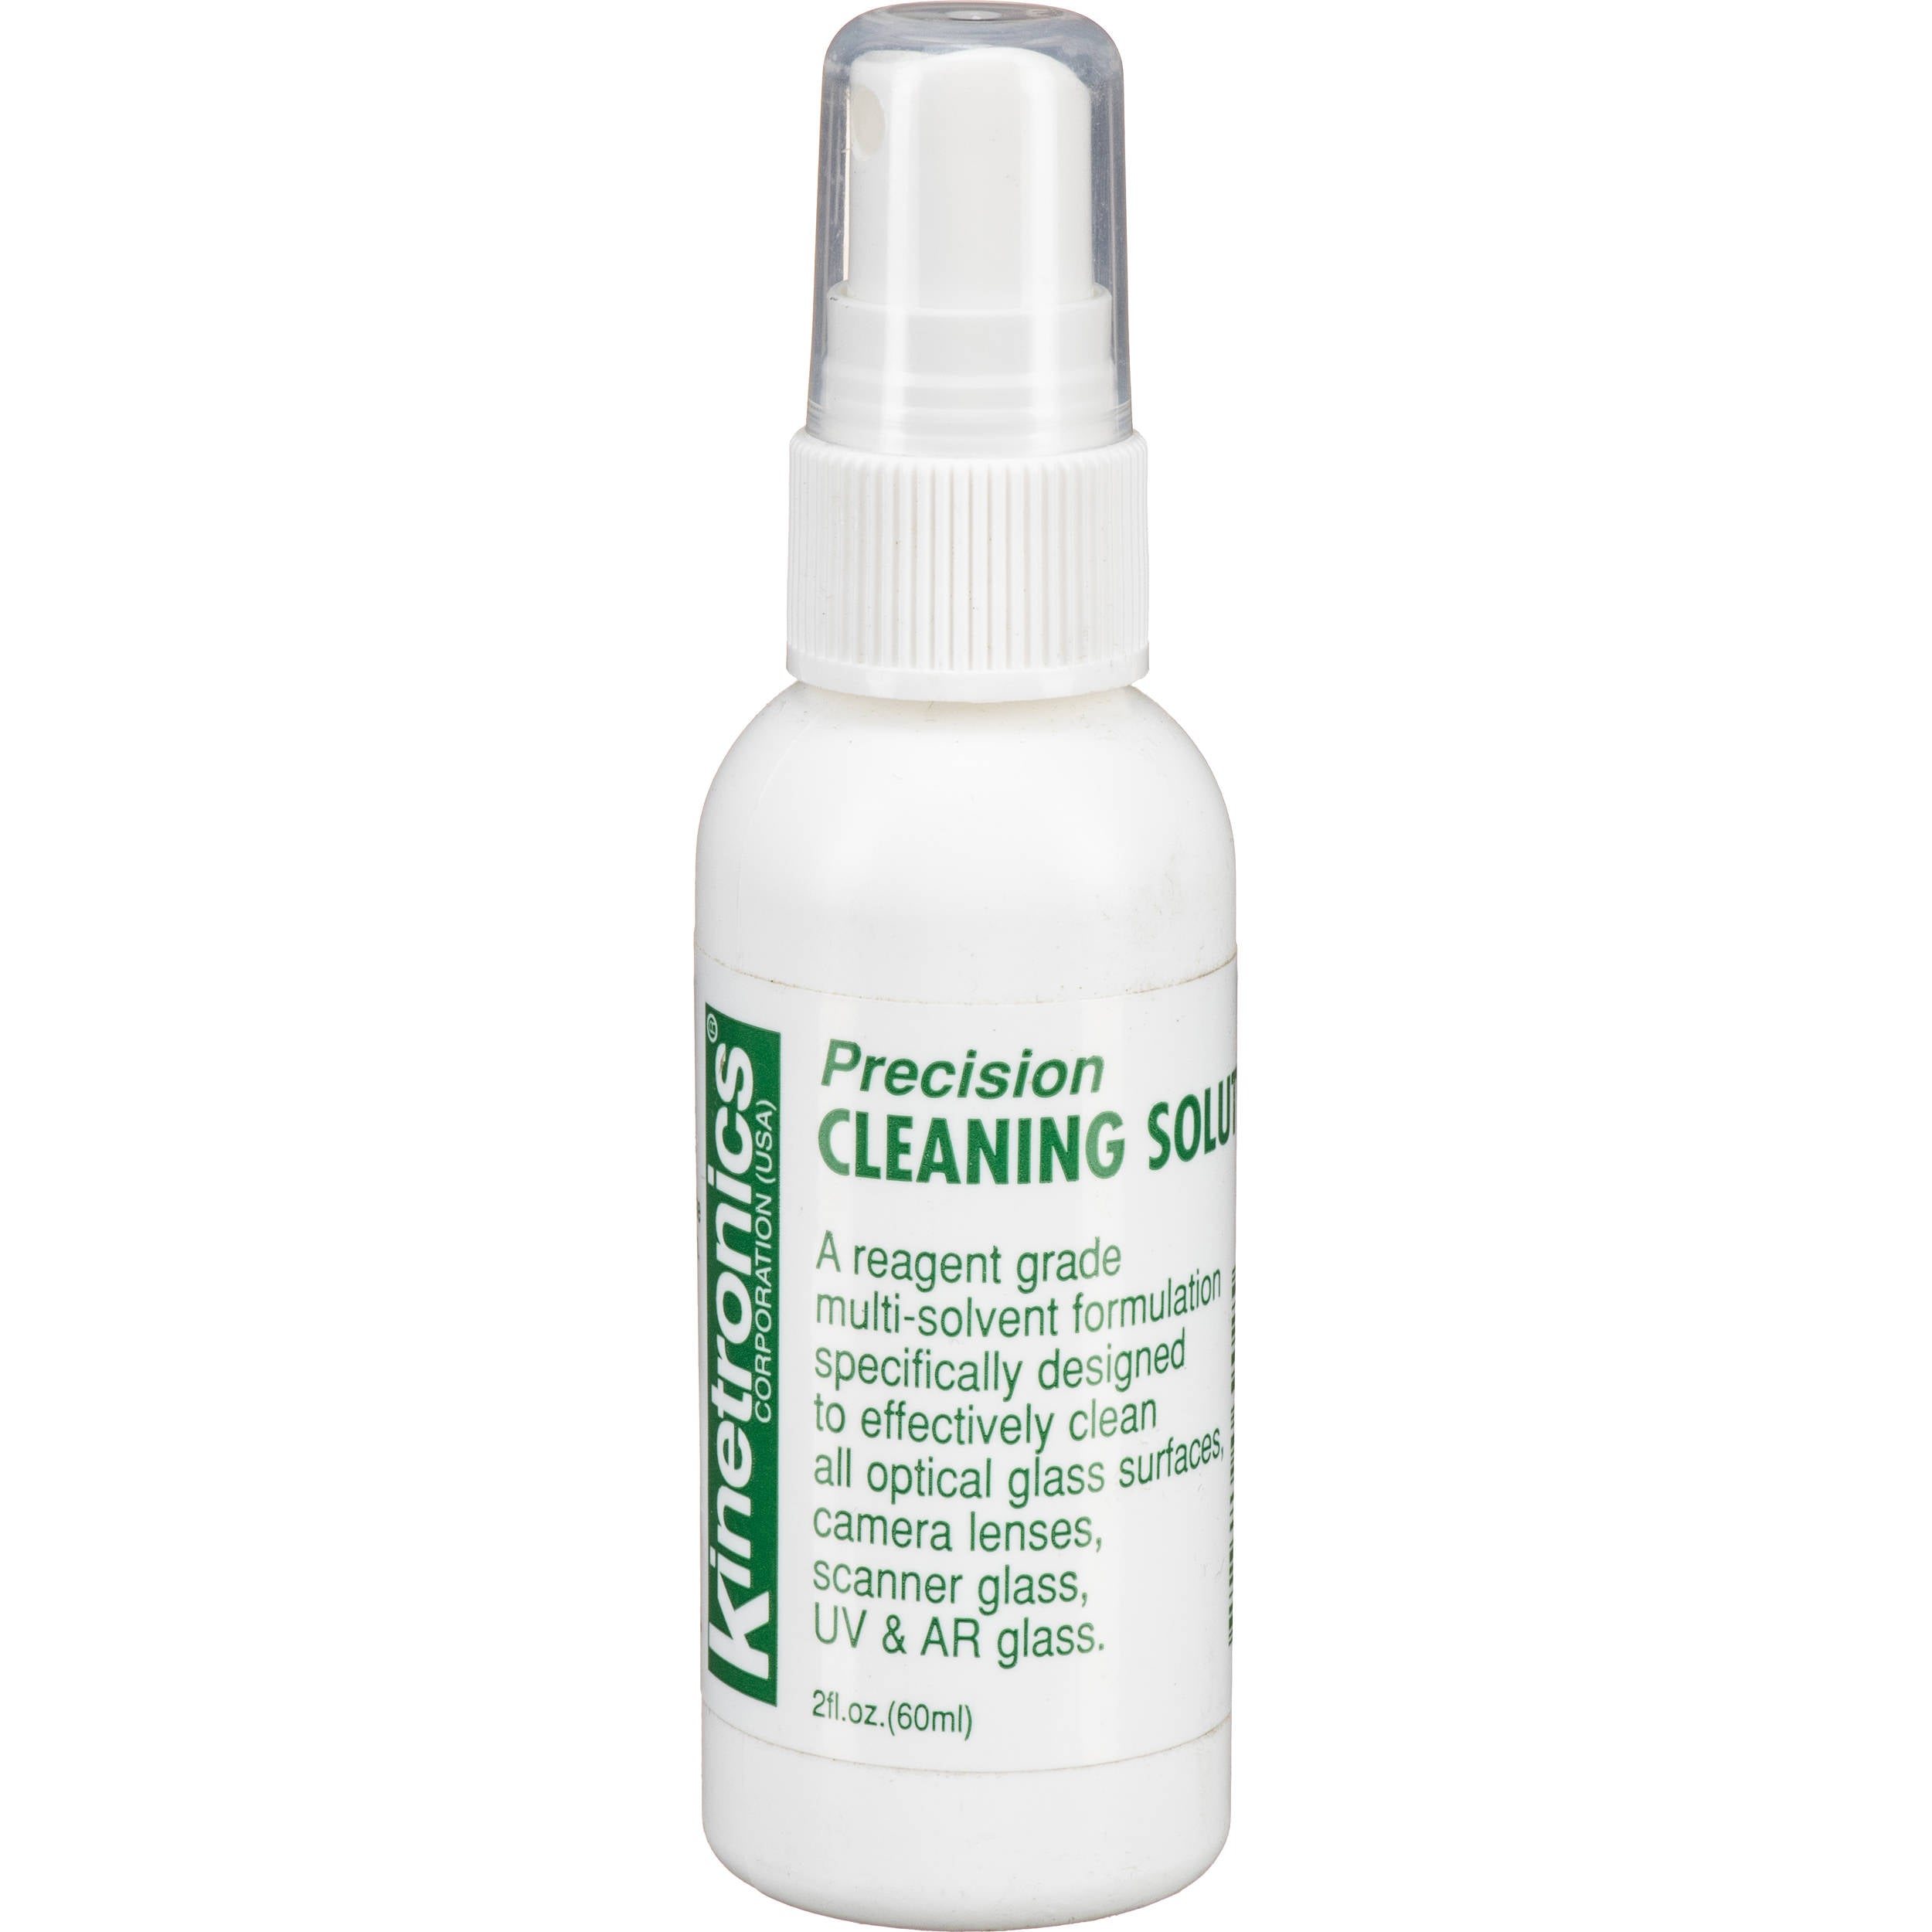 Precision Cleaning Solution 60ml Pump Spray